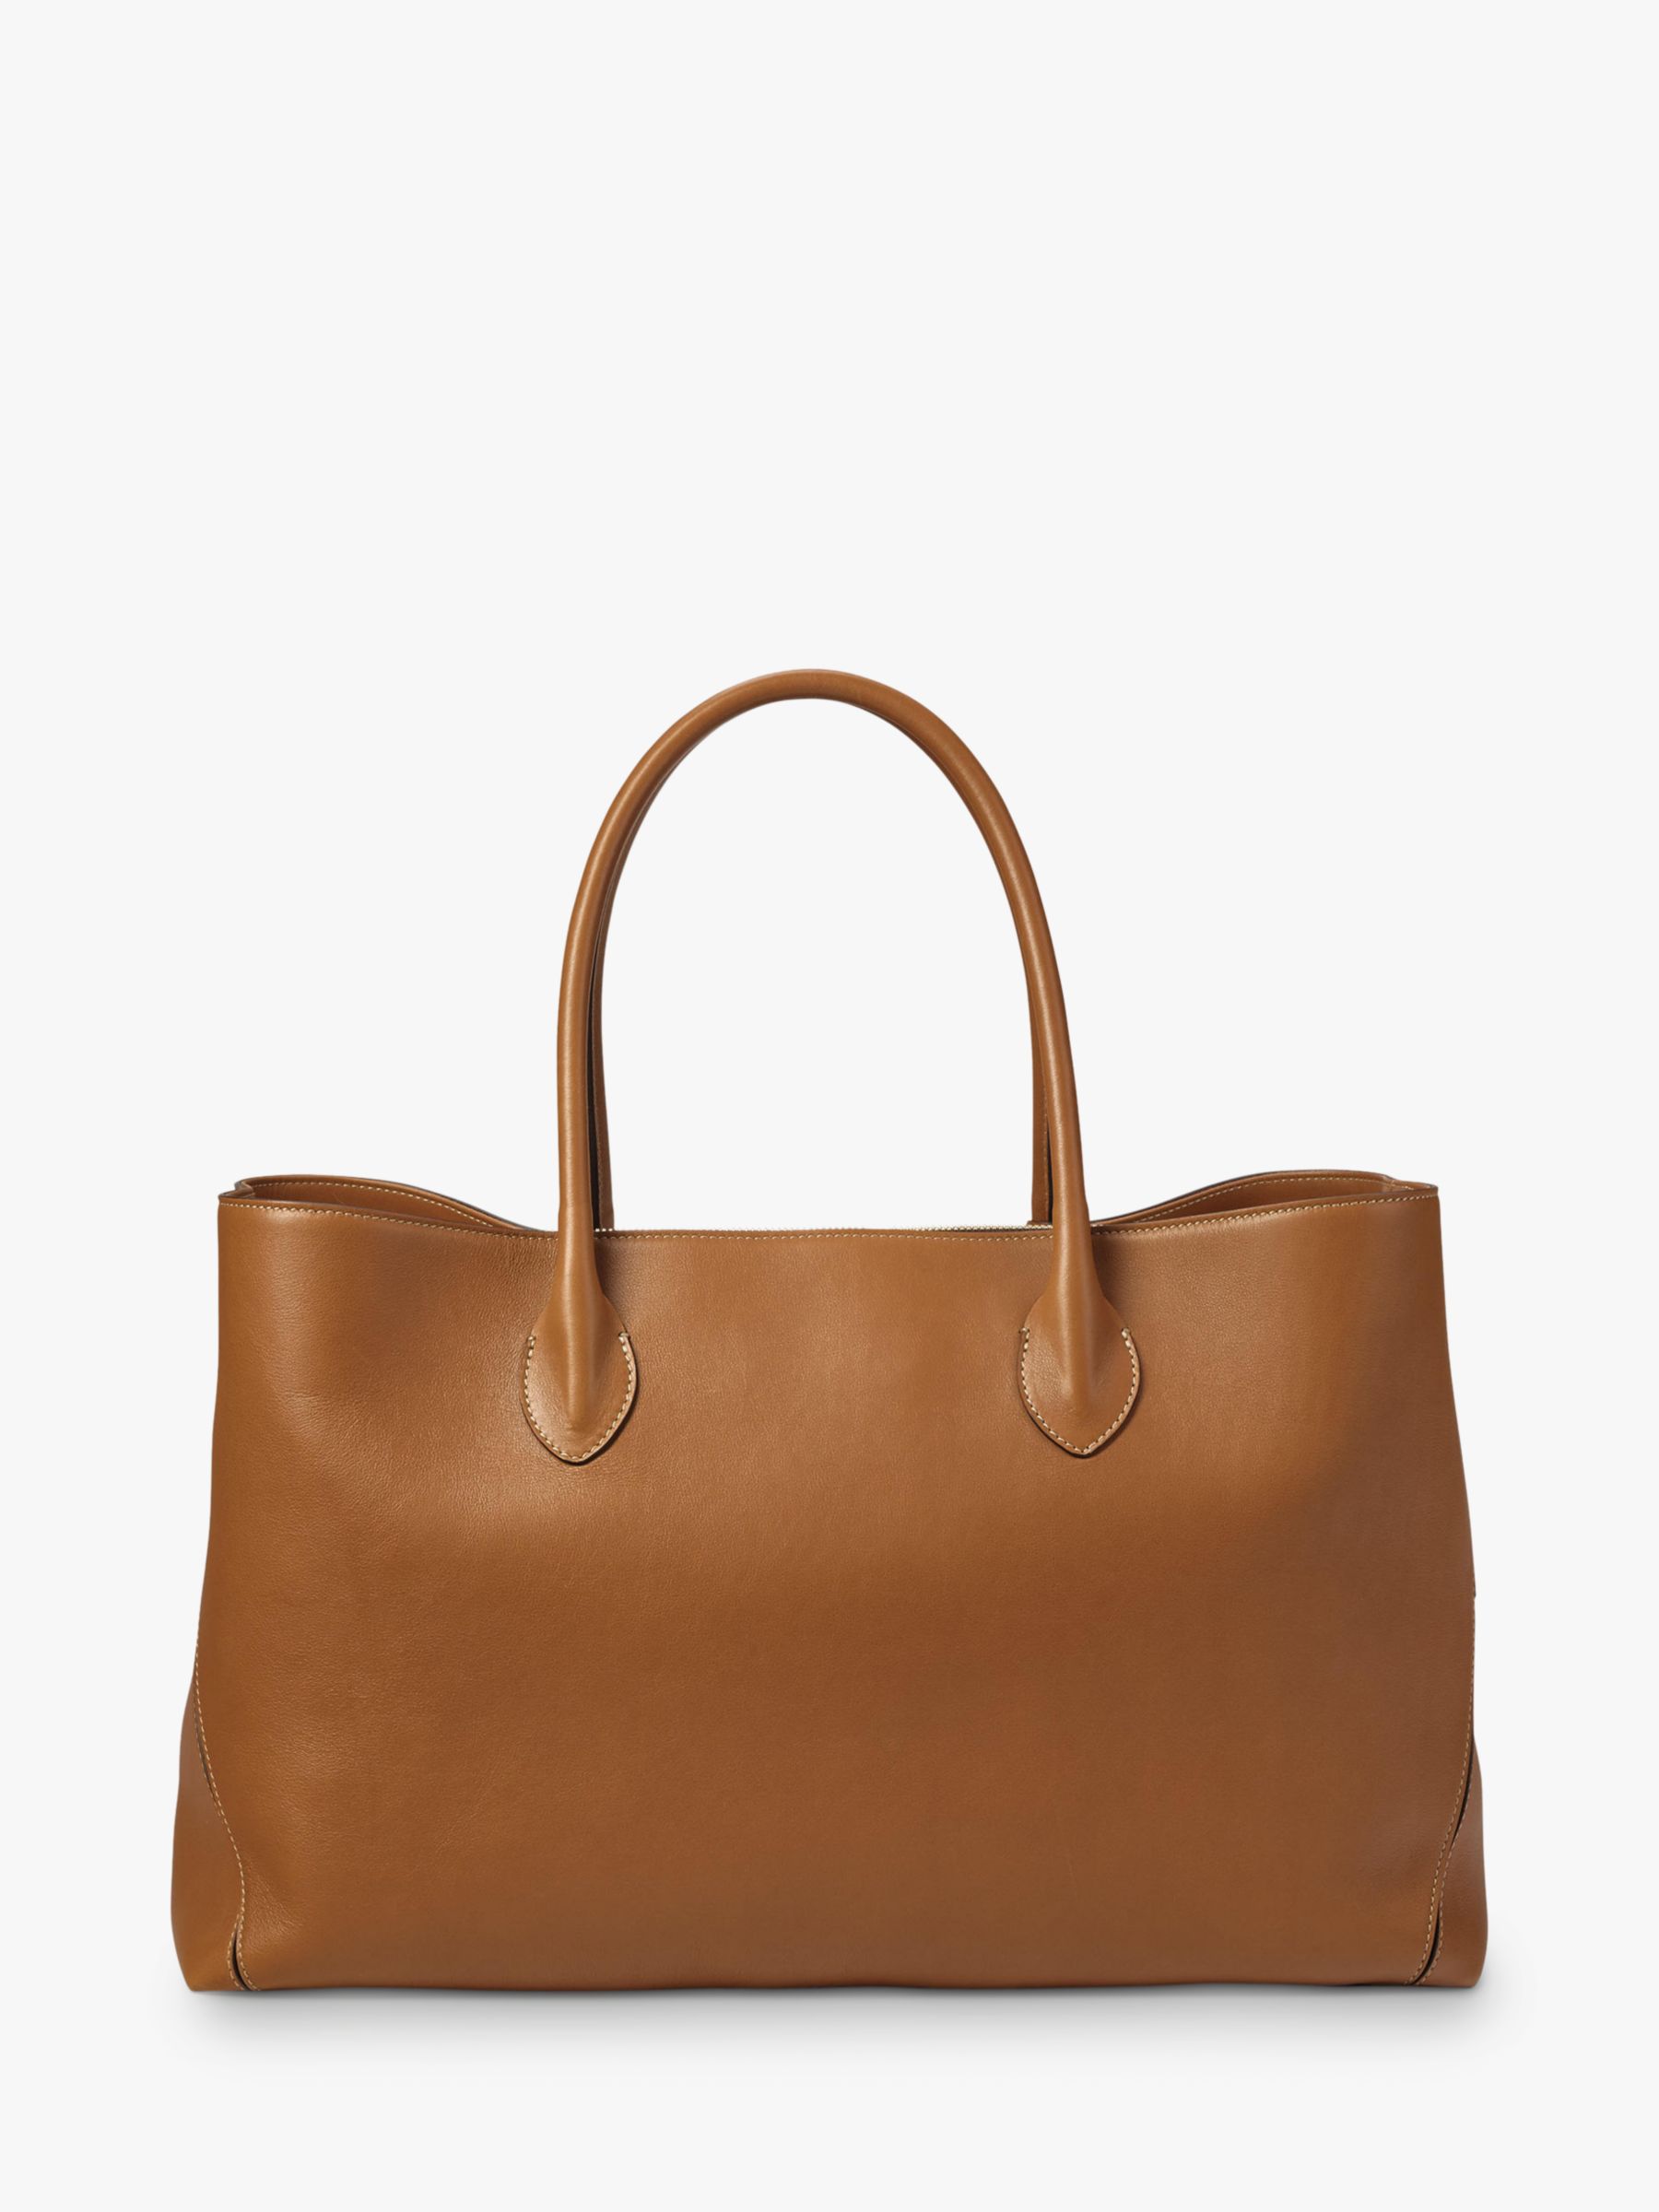 The Leather Tote Bag Collection